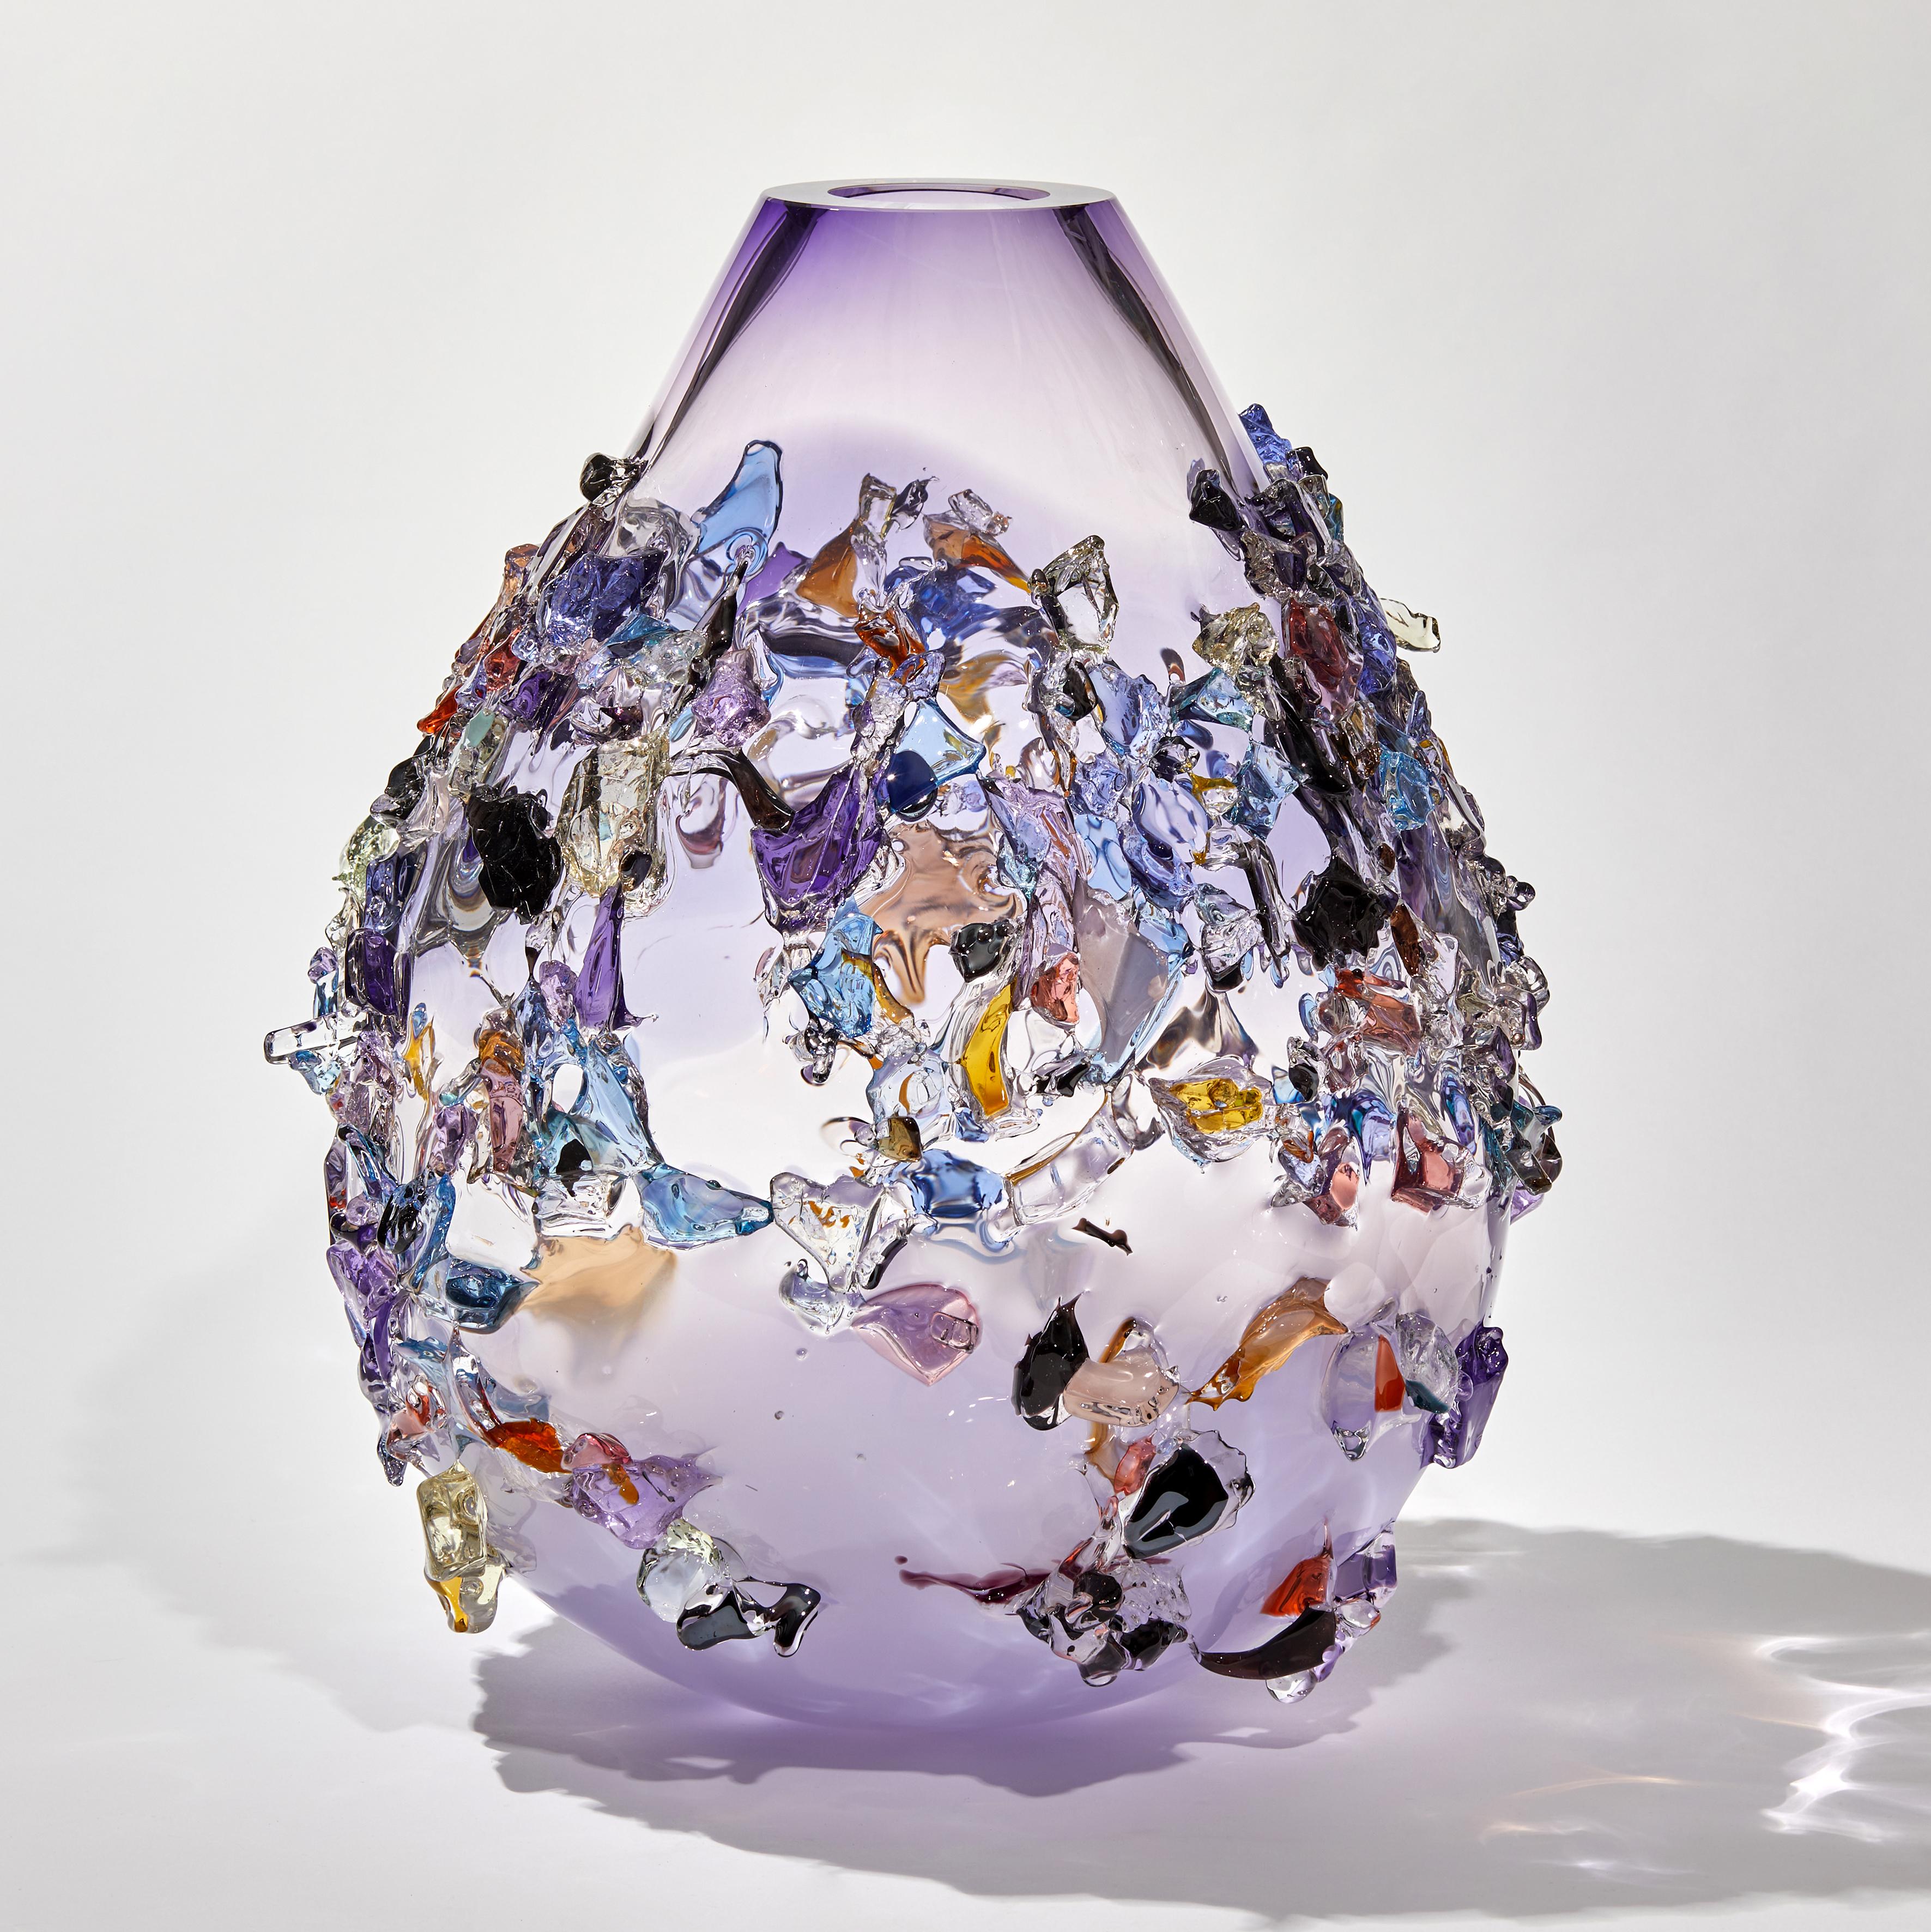 Sakura TRP21001 is a unique soft purple, lilac and multicolored hand-blown art glass sculptural vase, covered in an organic glass shard adornment by the Dutch artist Maarten Vorlijk. The piece is flame polished to soften the edges of all the